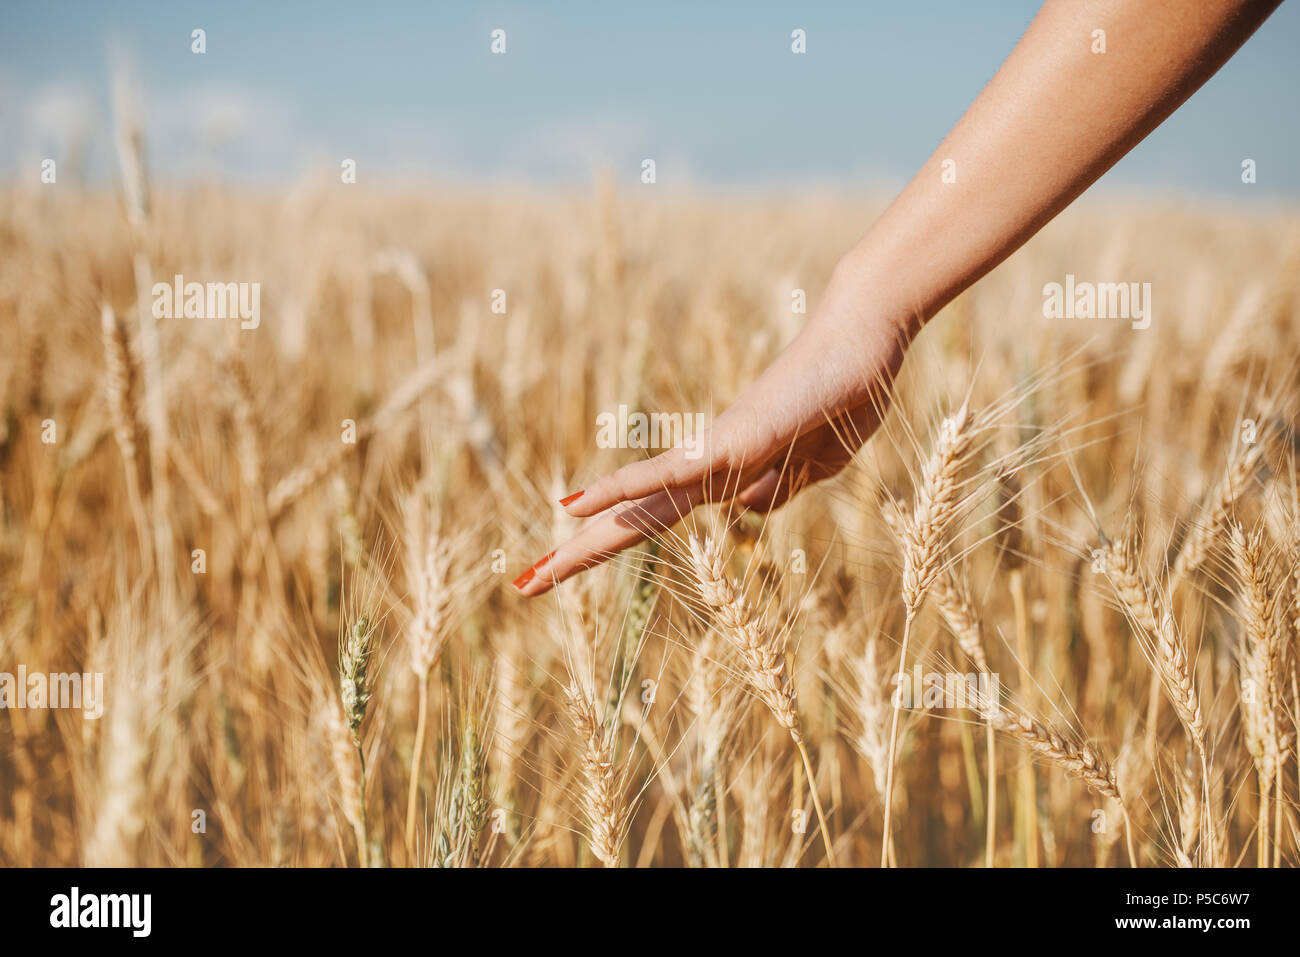 Close-up of woman's hand running through wheat field, dolly shot. Girl's hand touching wheat ears closeup Stock Photo